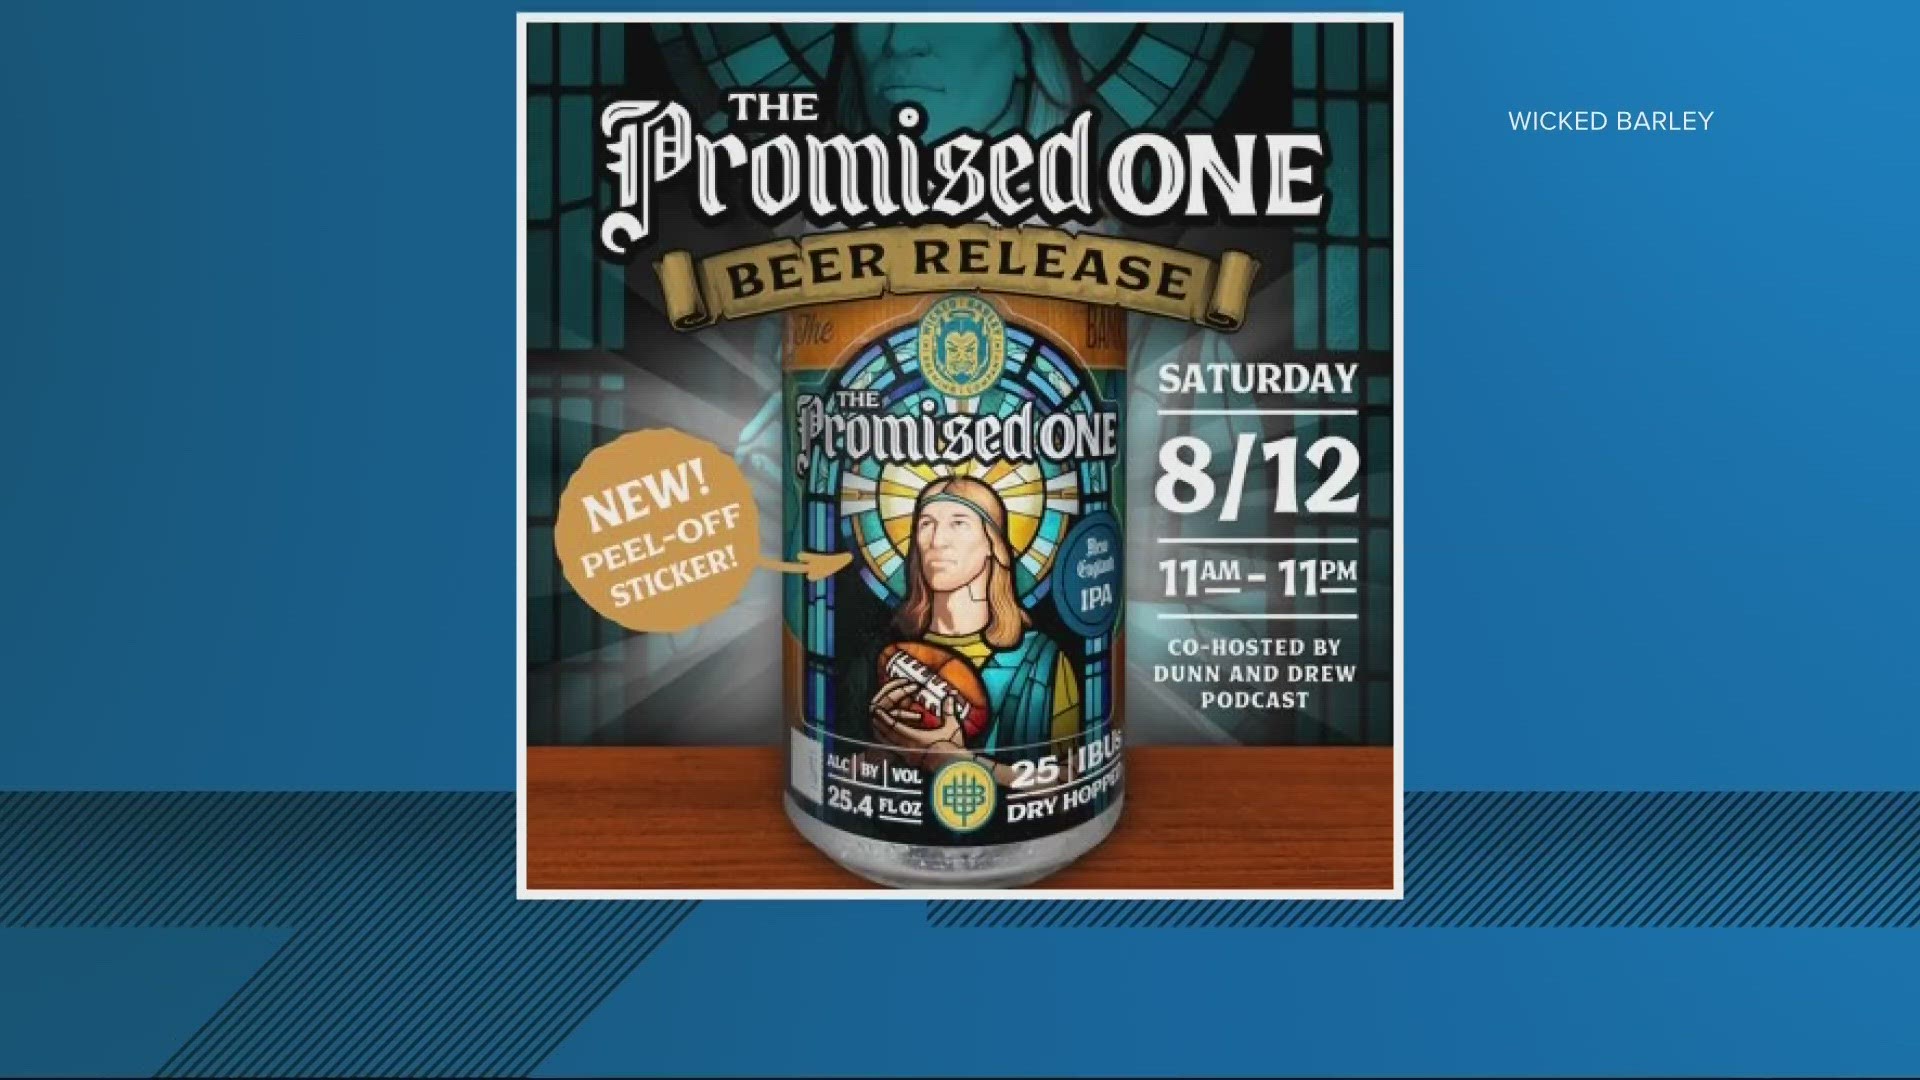 According to the Dunn and Drew's Twitter page, "The Promised One" beer release features Trevor Lawrence on the front of the 25.4 ounce limited edition can.